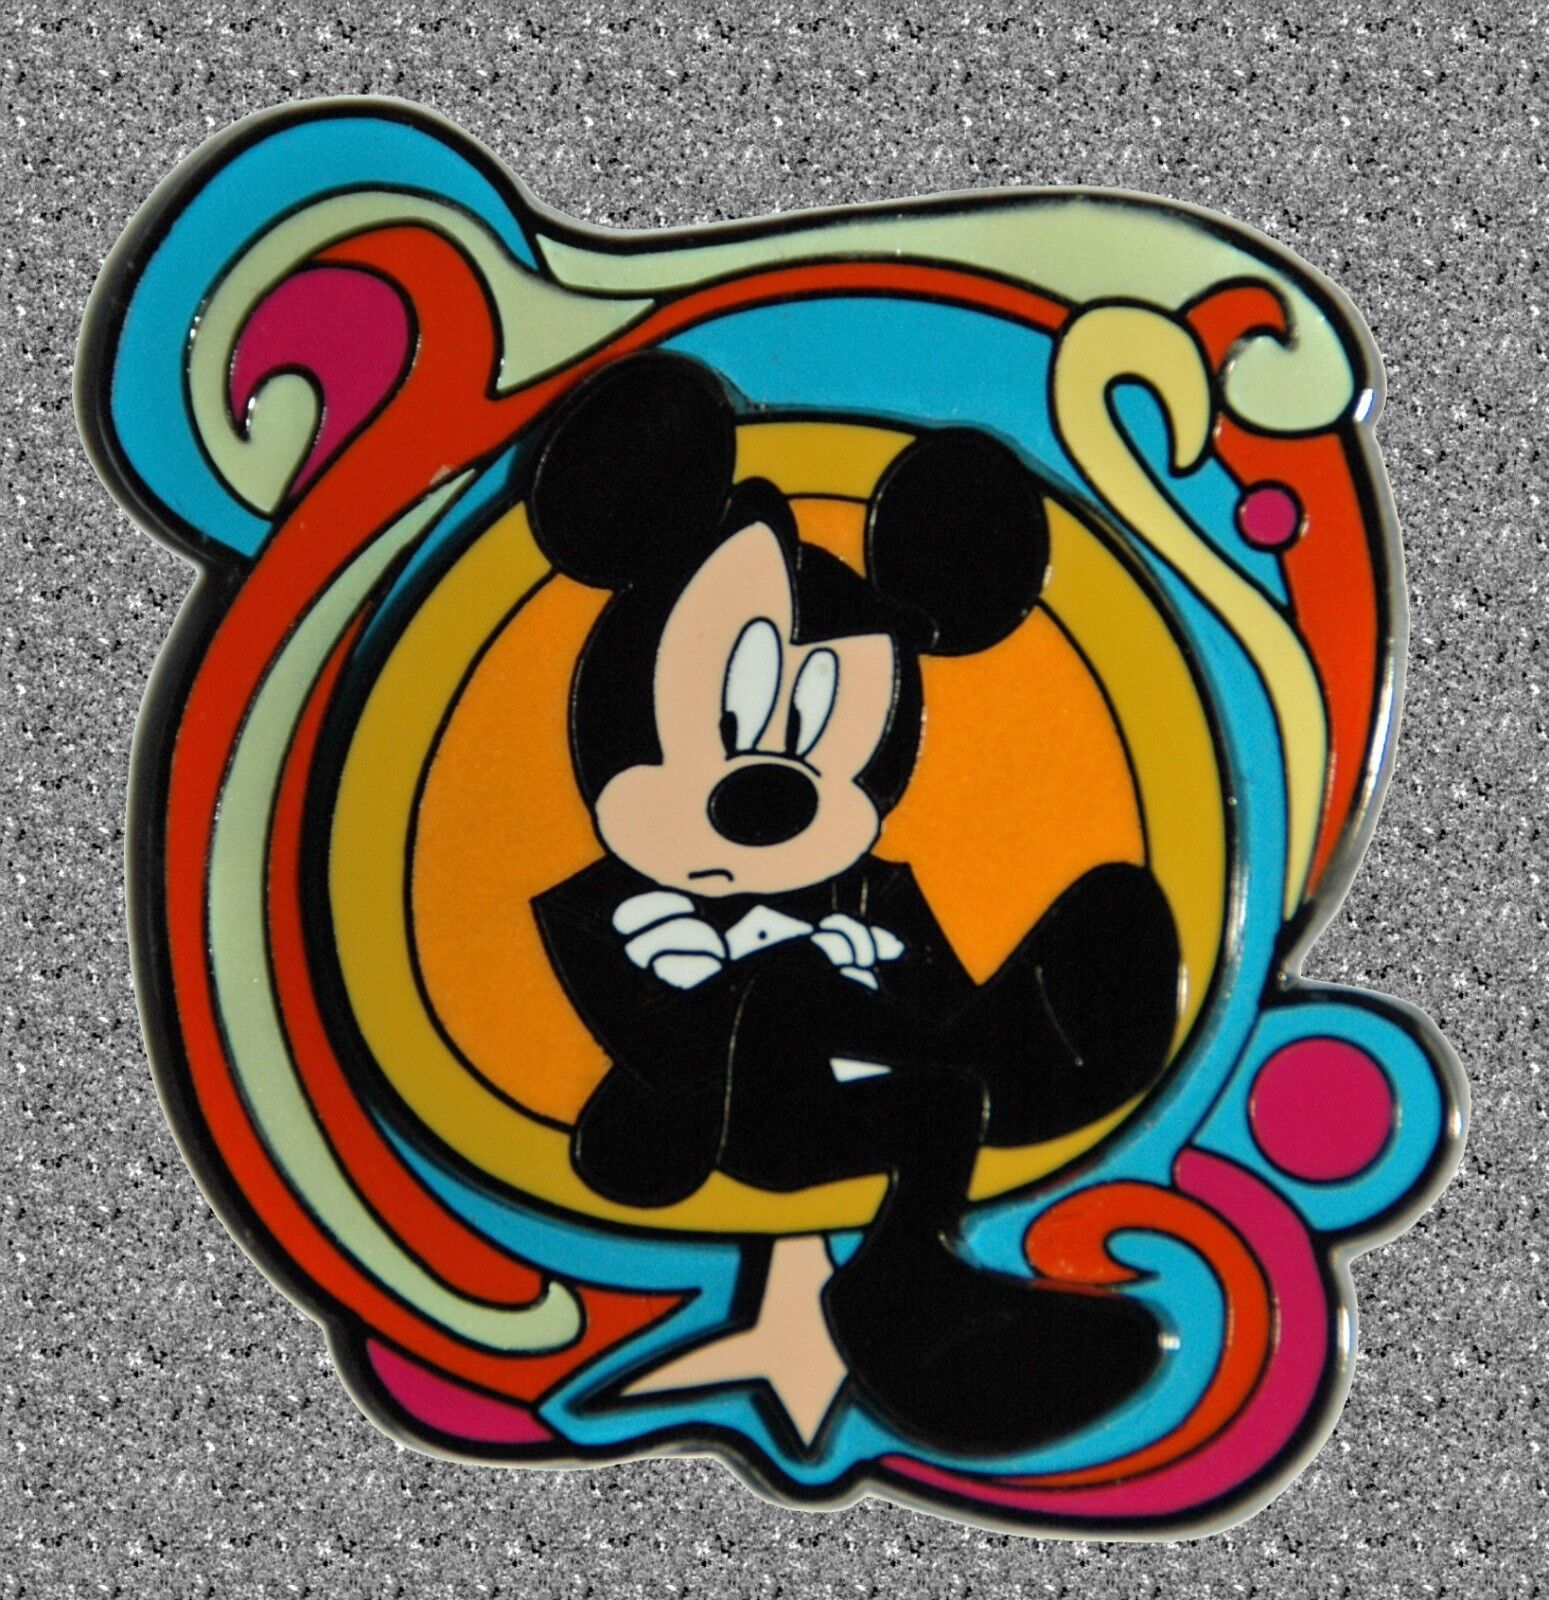  Mickey Mouse Secret Agent Pin - DISNEY LE 3600 - DLR  Event Glows in the Dark